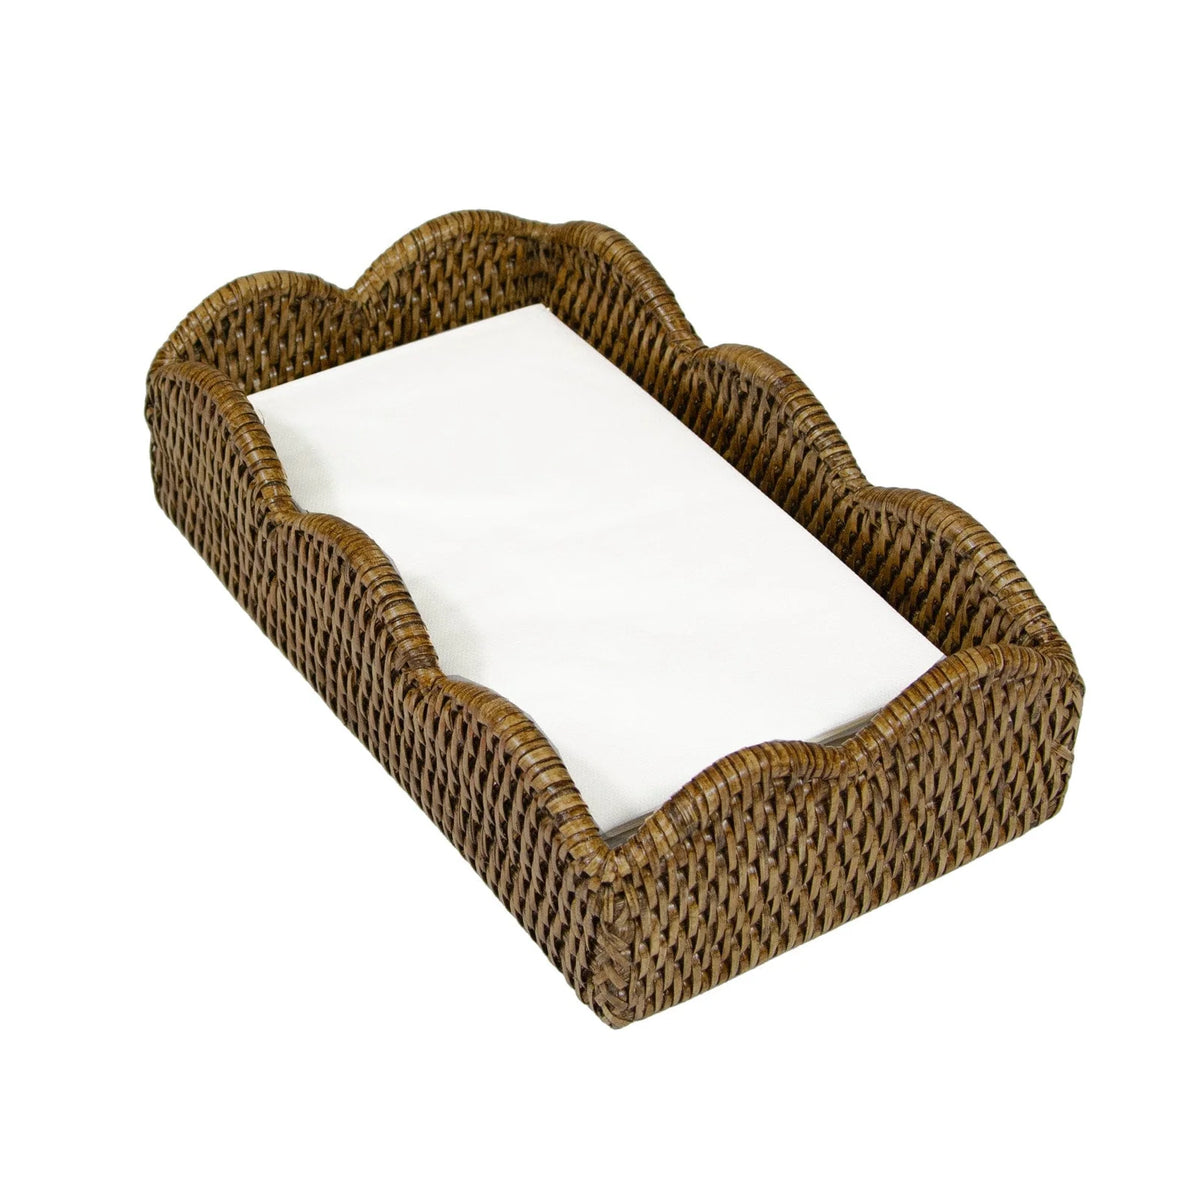 Rattan Scalloped Guest Towel Napkin Holders in Natural